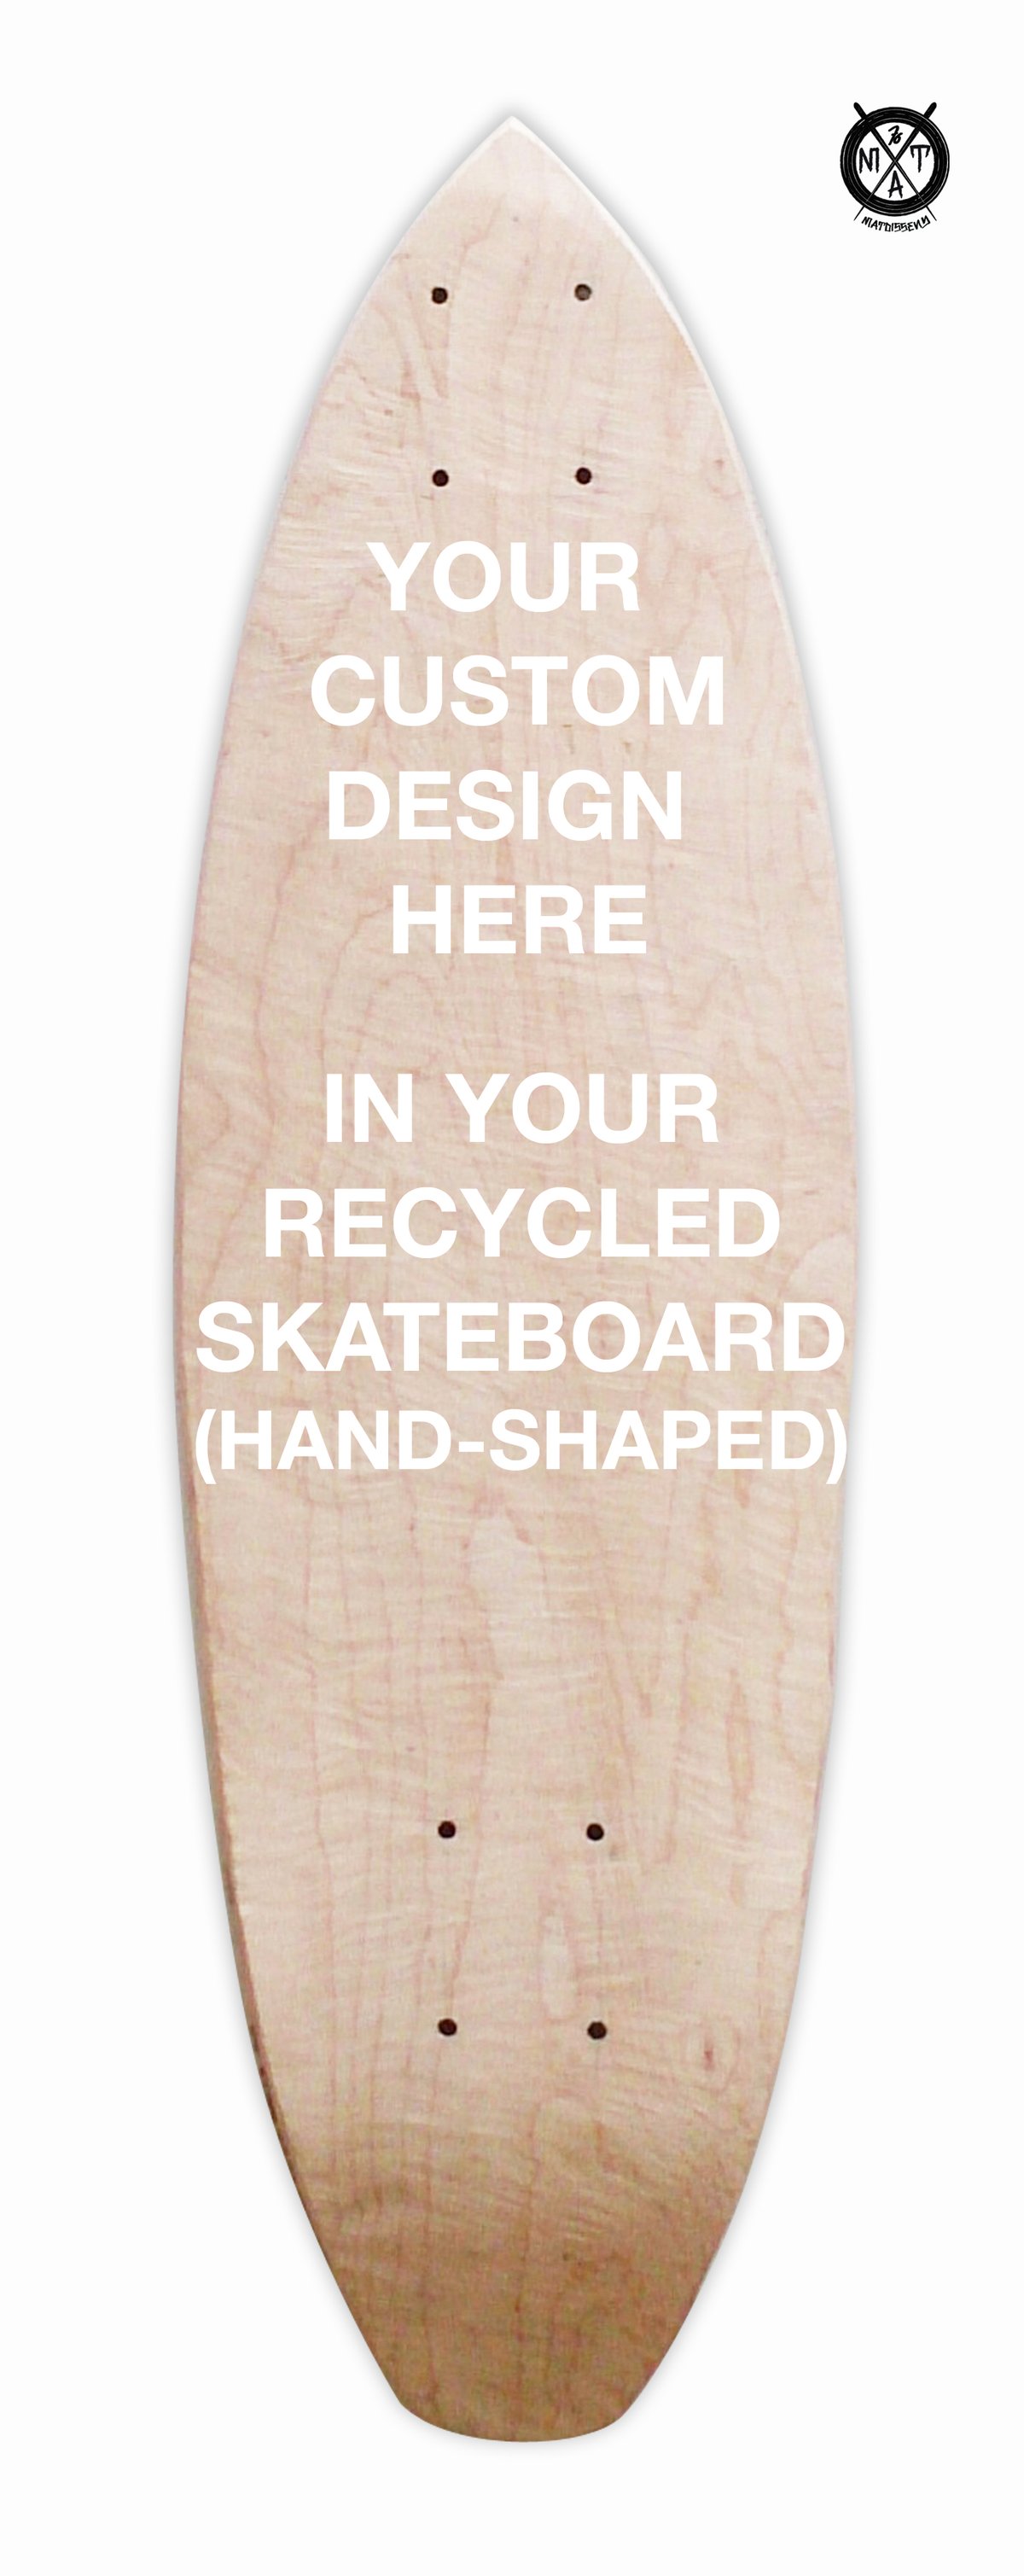 Image of Skate Art (Commision Artwork in your recycled Skateboard) Hand-shaped by @matdisseny